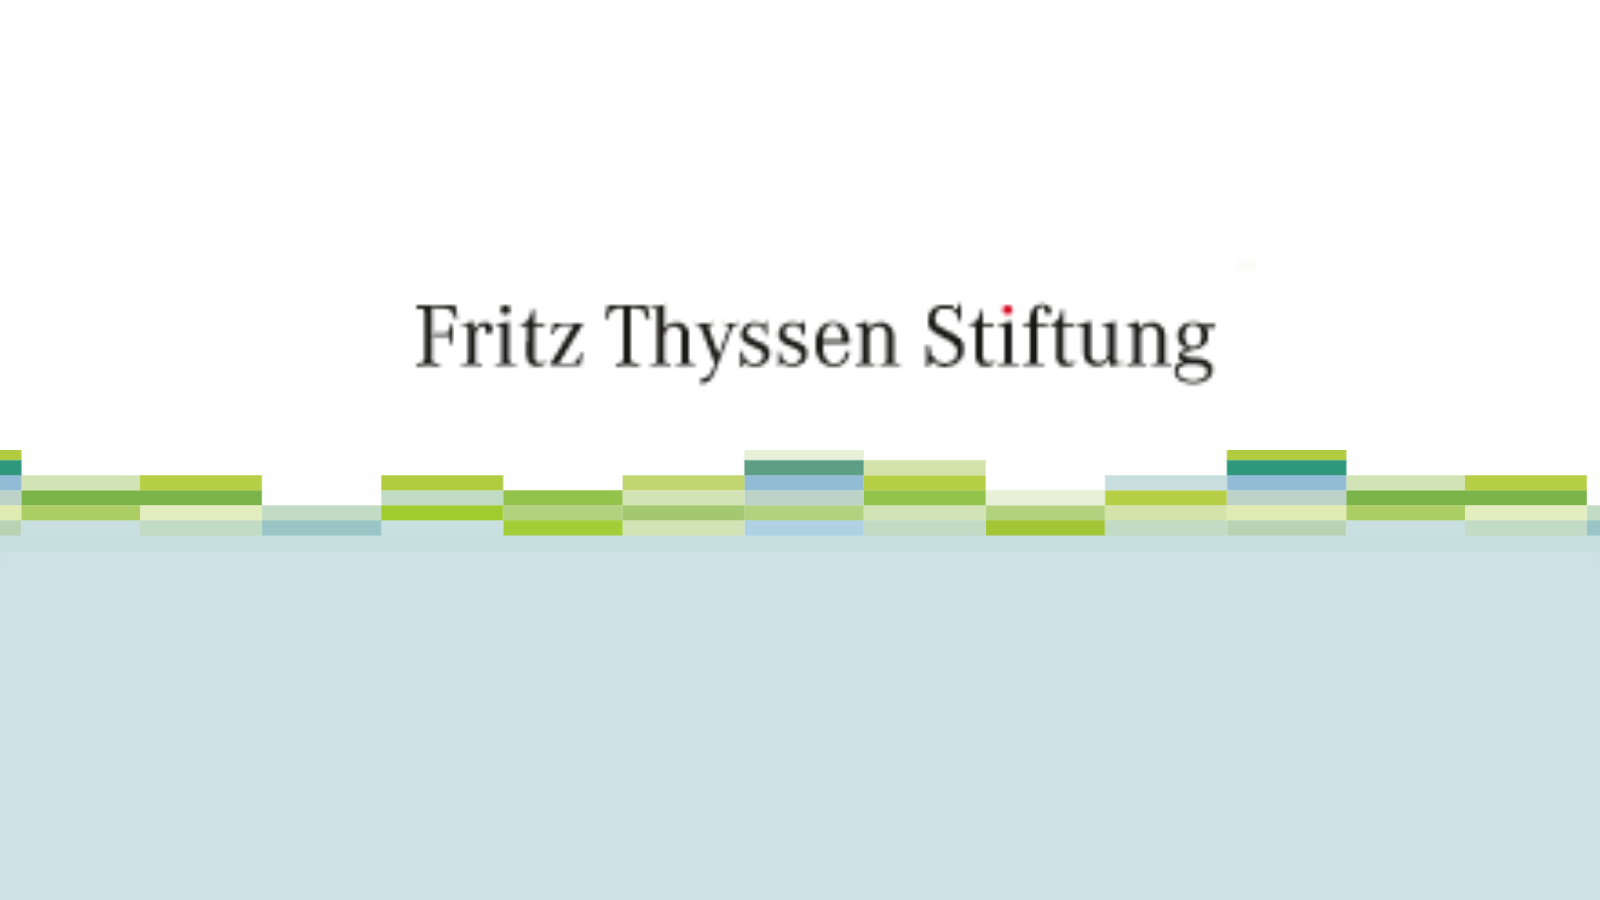 Fritz Thyssen Stiftung with design of rectangles underneath